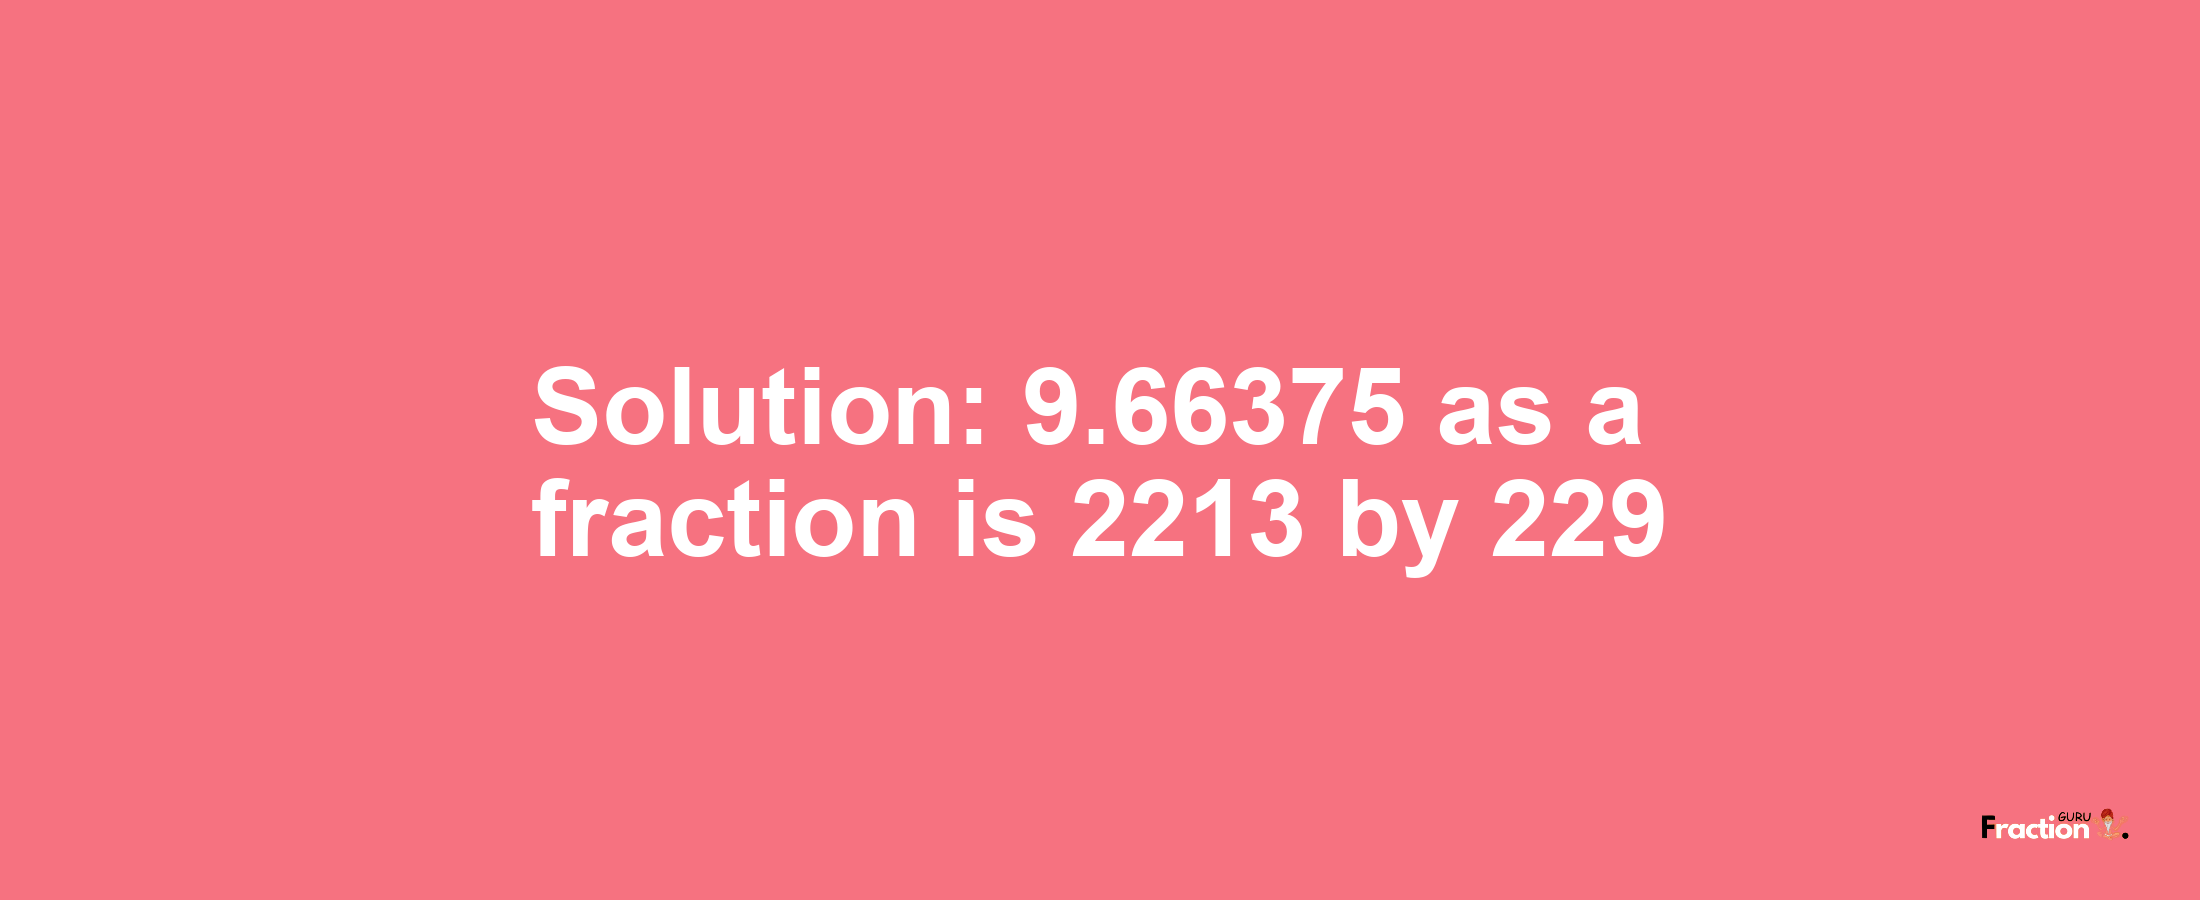 Solution:9.66375 as a fraction is 2213/229